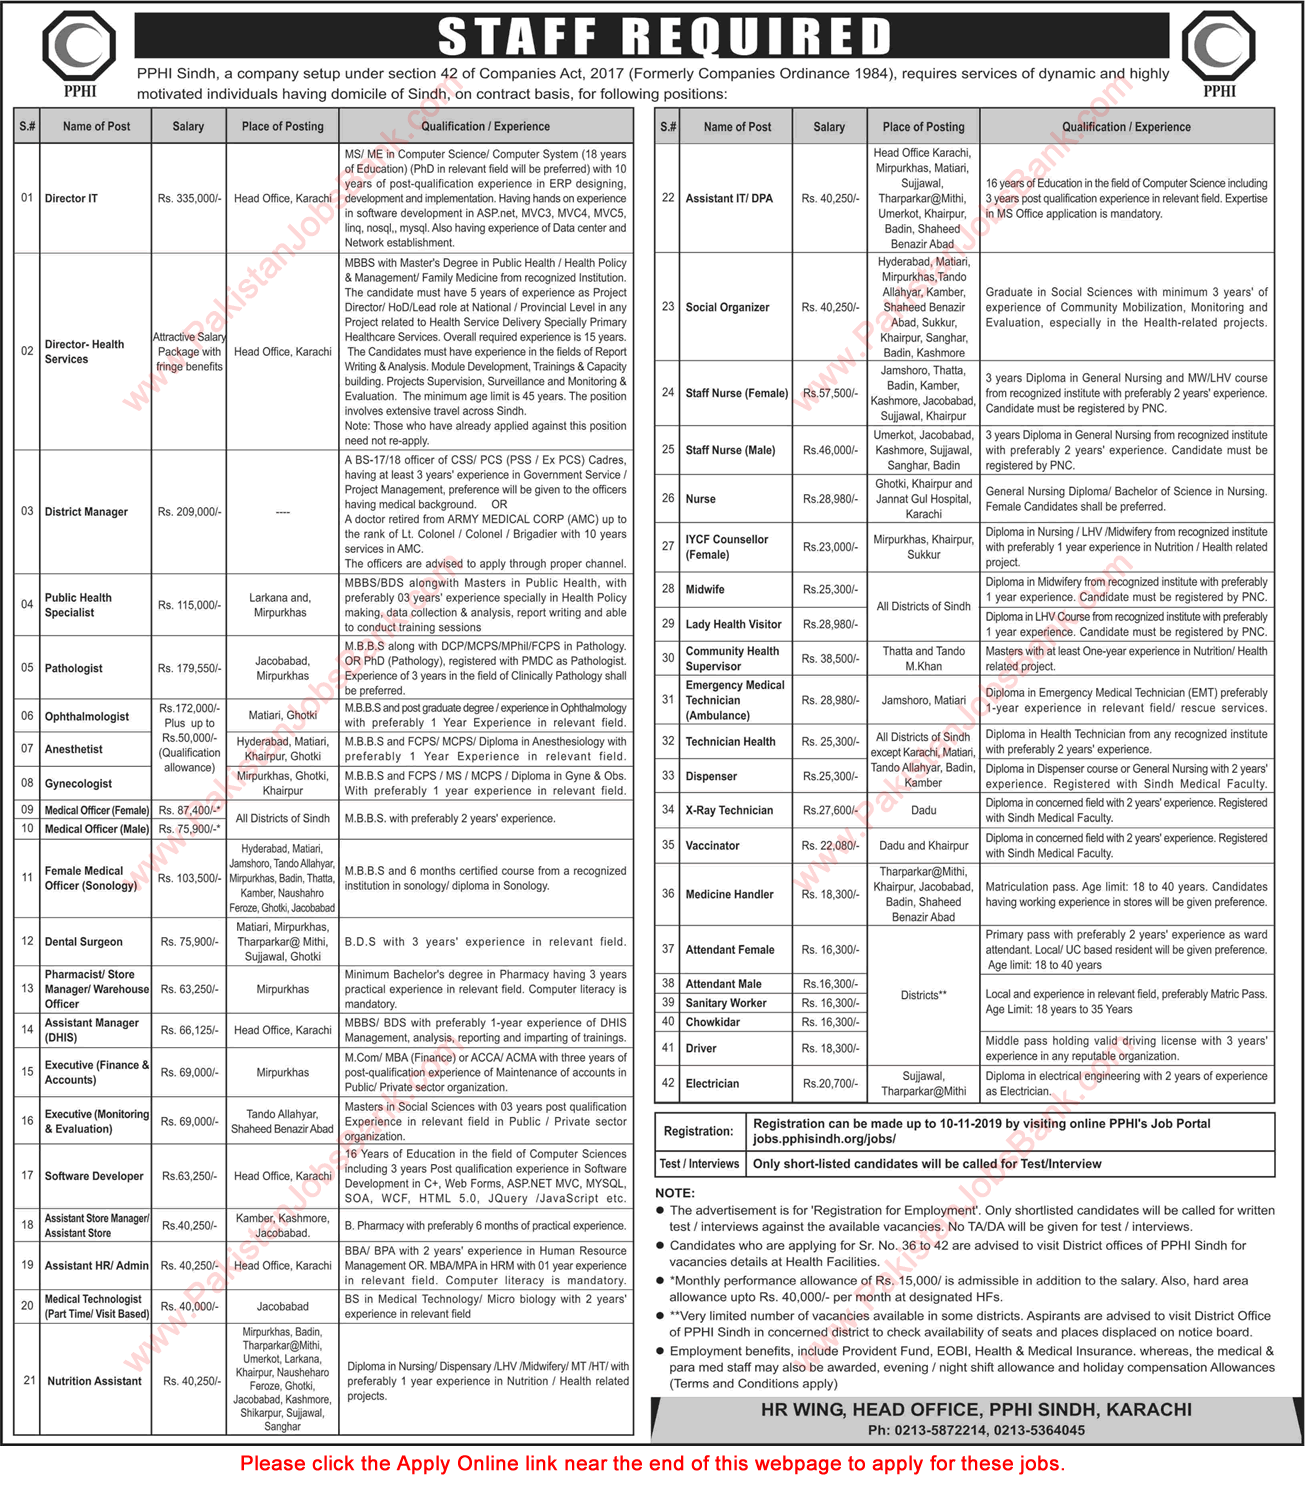 PPHI Sindh Jobs October 2019 Apply Online People's Primary Healthcare Initiative Latest